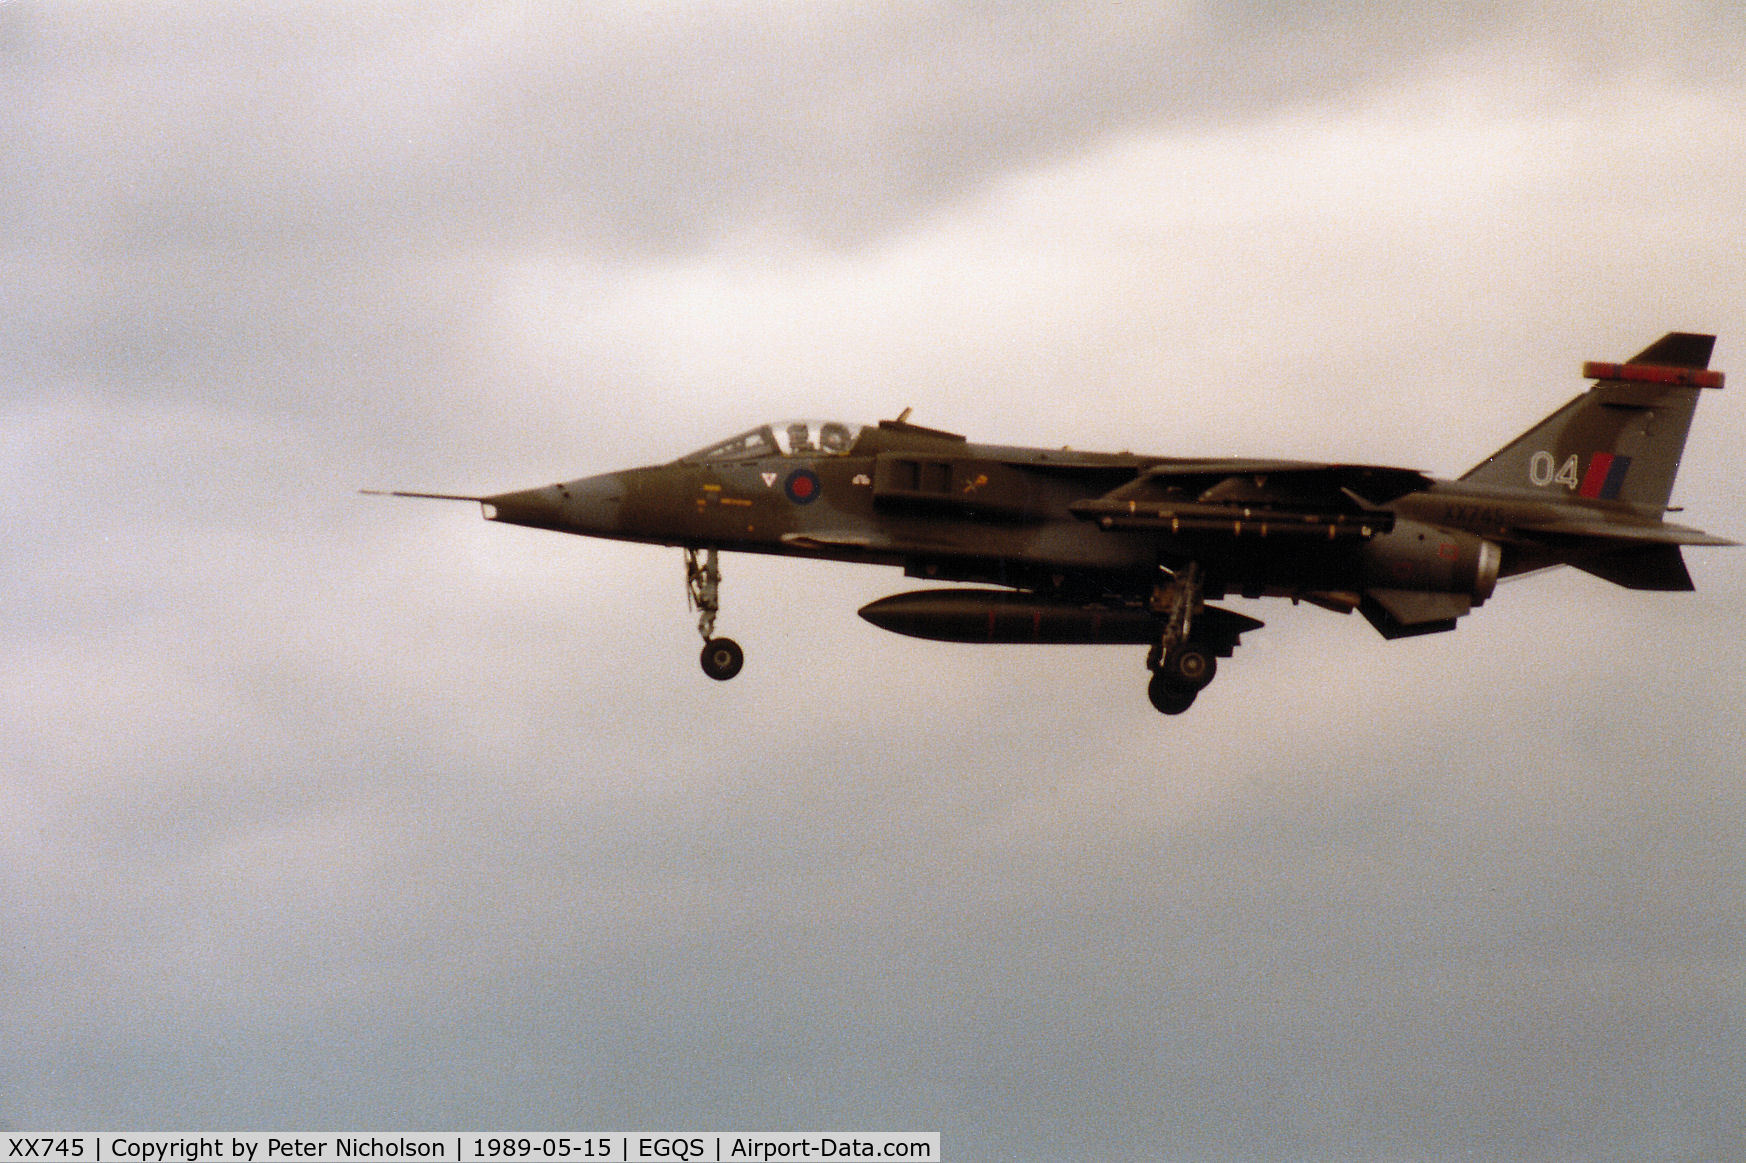 XX745, 1974 Sepecat Jaguar GR.1A C/N S.42, Jaguar GR.1A of 226 Operational Conversion Unit on final approach to Runway 23 at RAF Lossiemouth in May 1989.